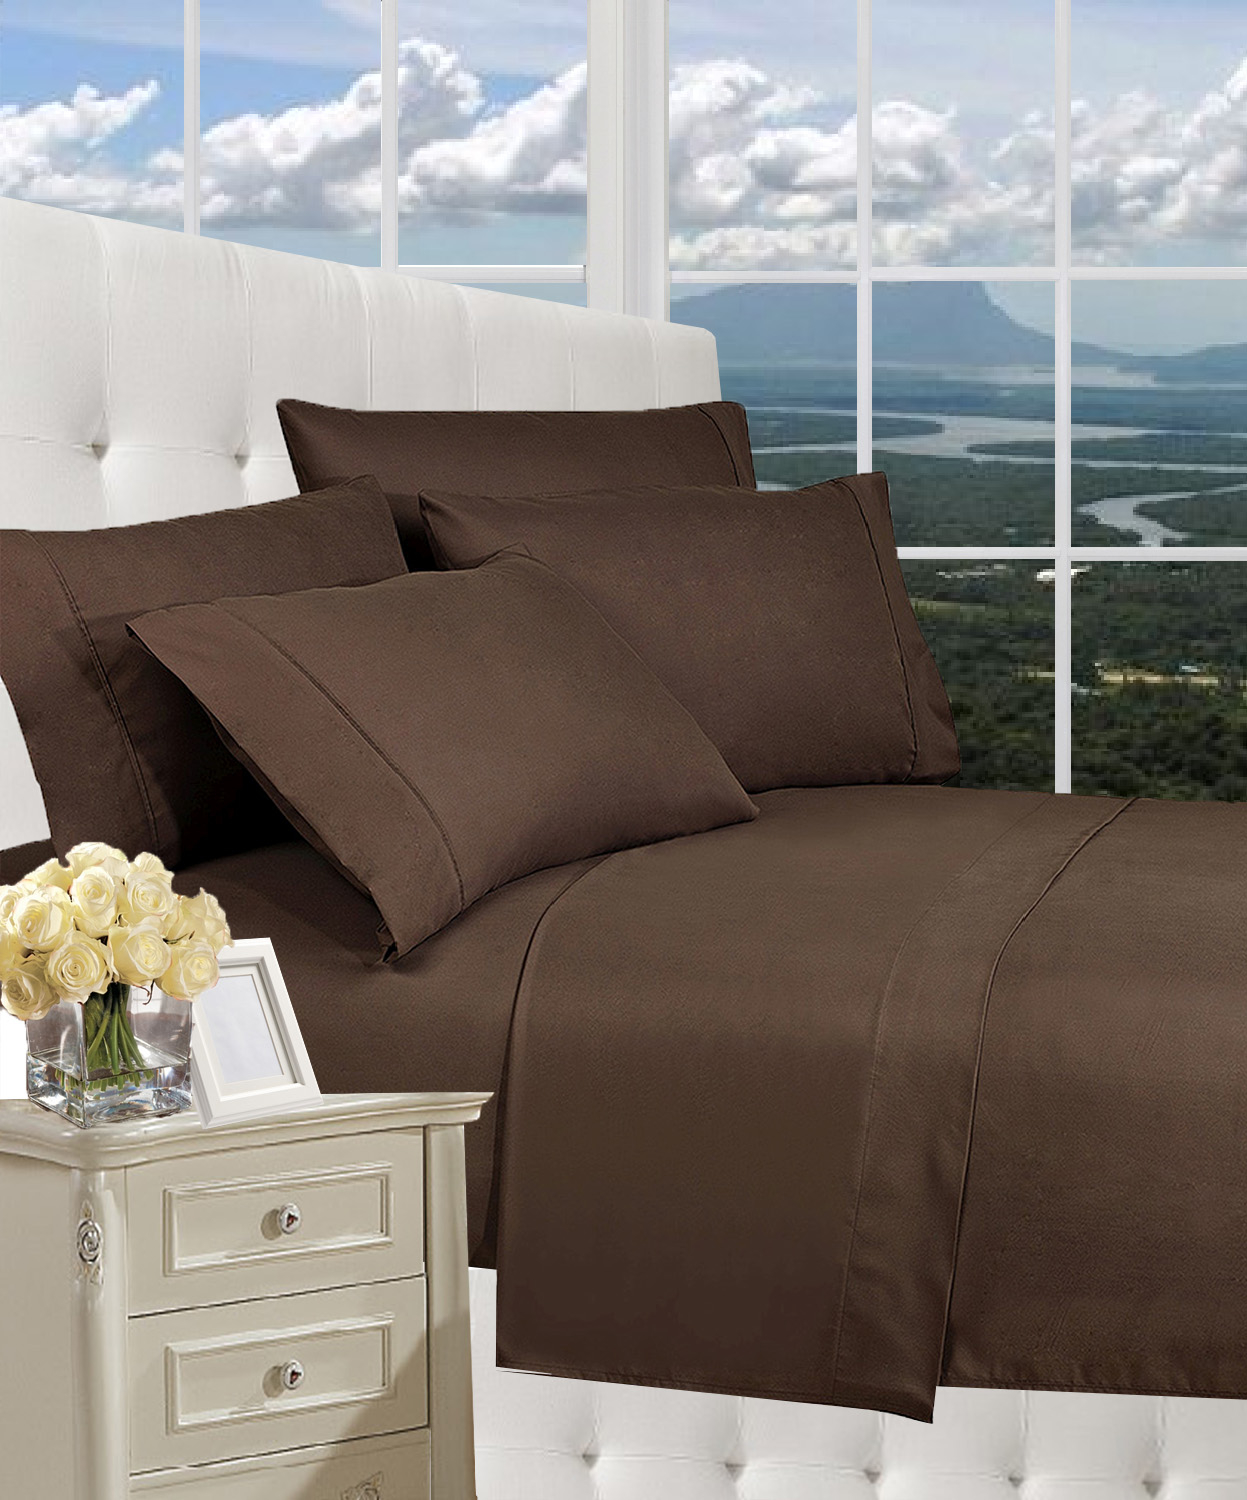 Elegant Comfort 1800 Series Wrinkle Resistant Egyptian Quality Ultra Soft Luxury 4-piece Bed Sheet Set, California King, Chocolate Brown